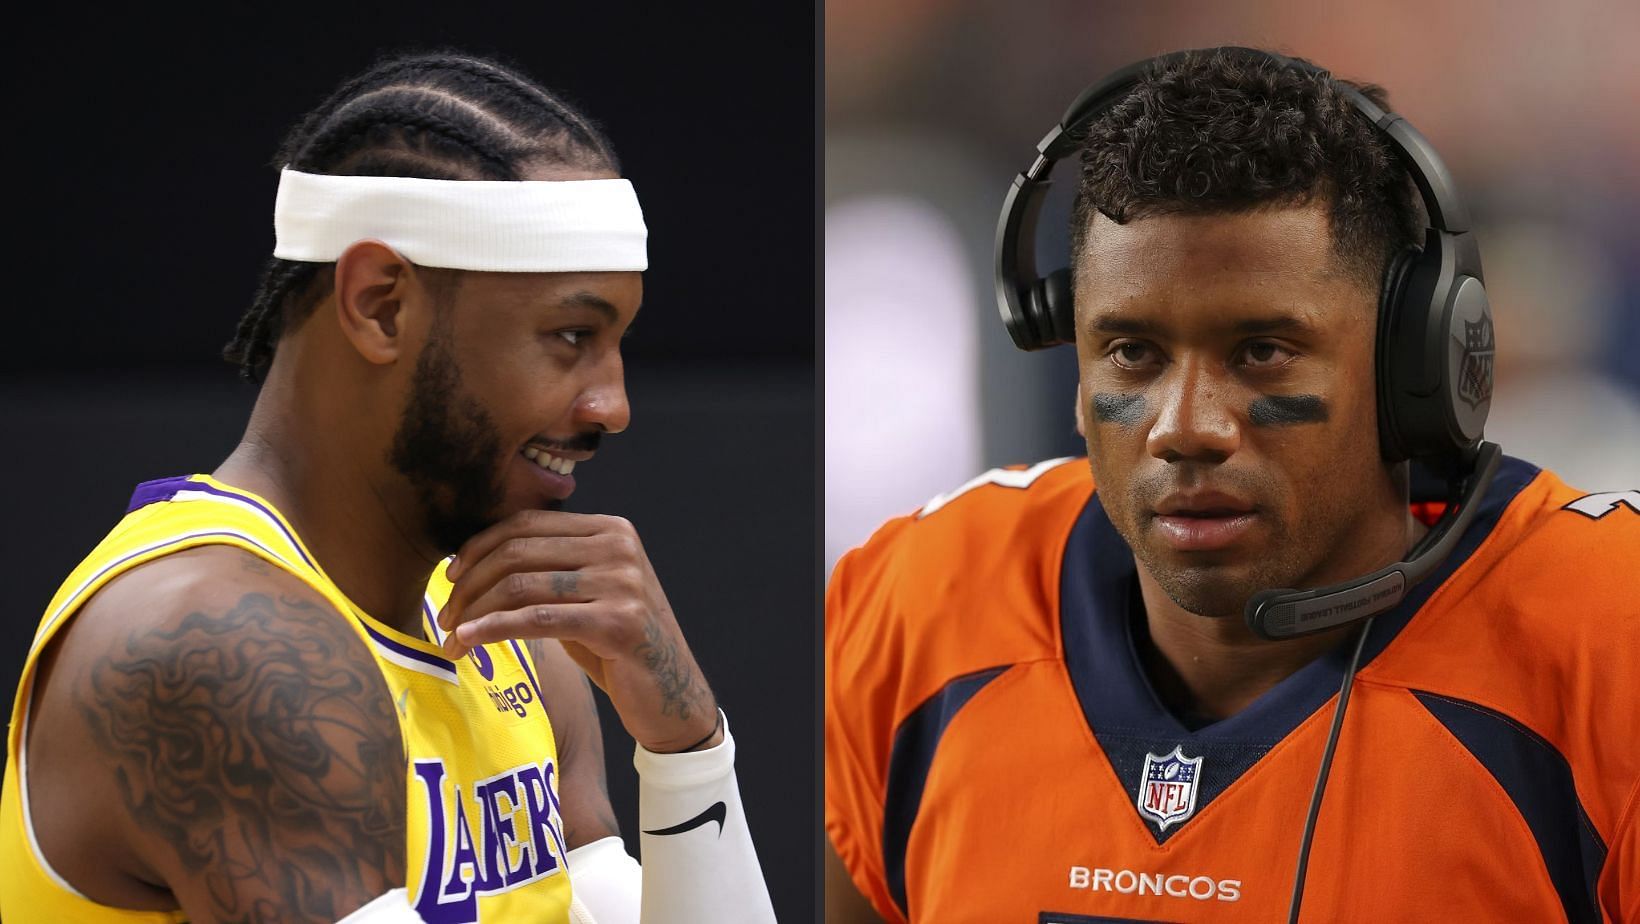 Broncos star Russell Wilson pays tribute after Carmelo Anthony